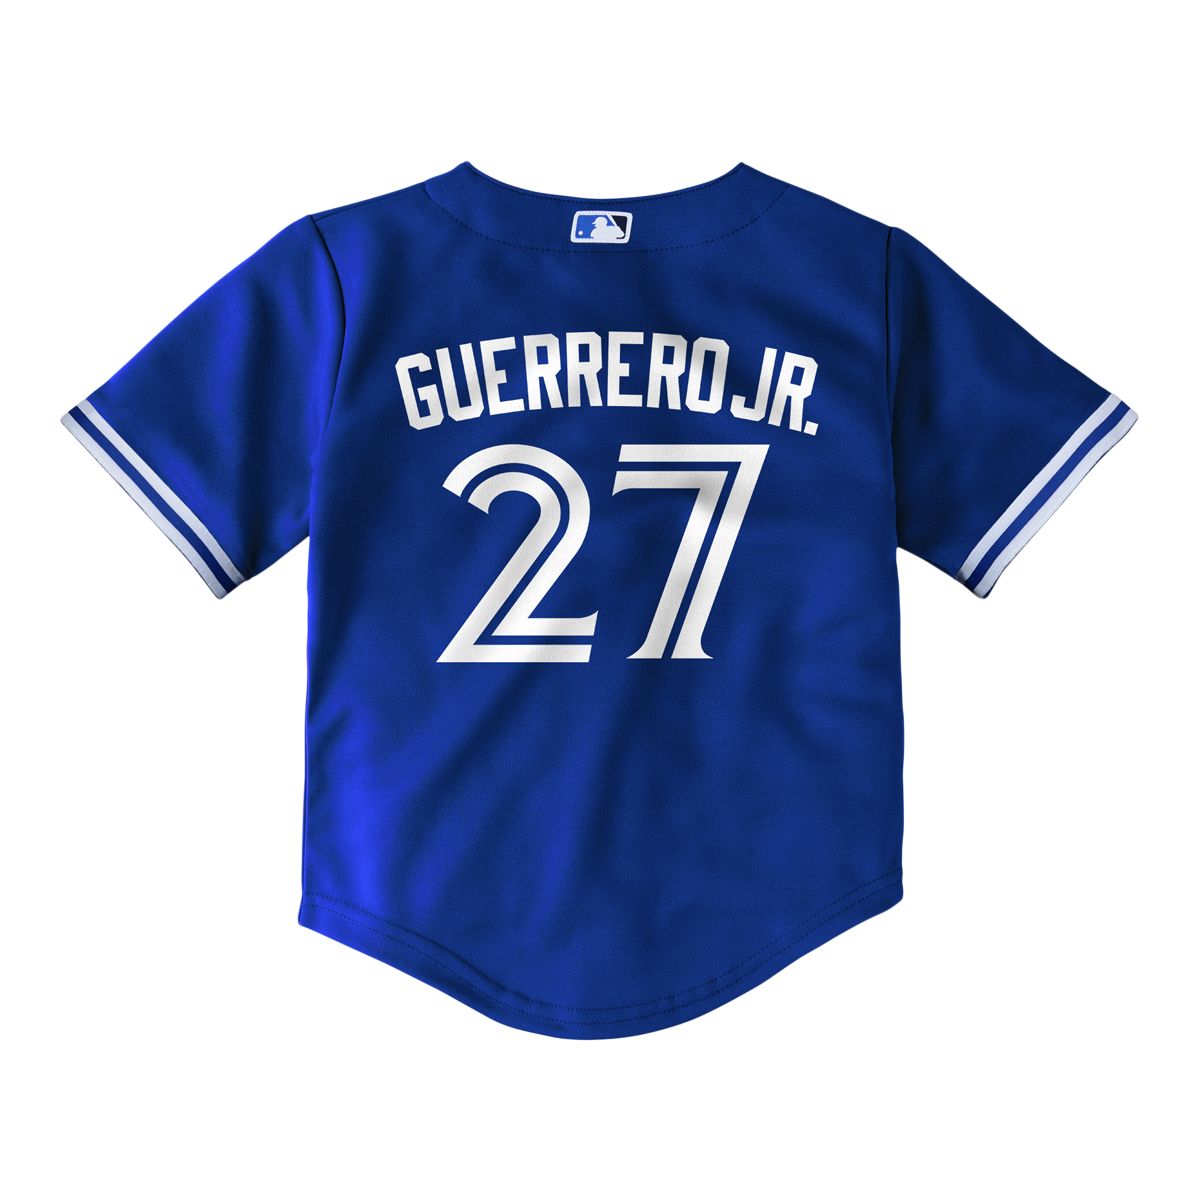 Toronto Blue Jays Nike Official Replica Road Jersey - Mens